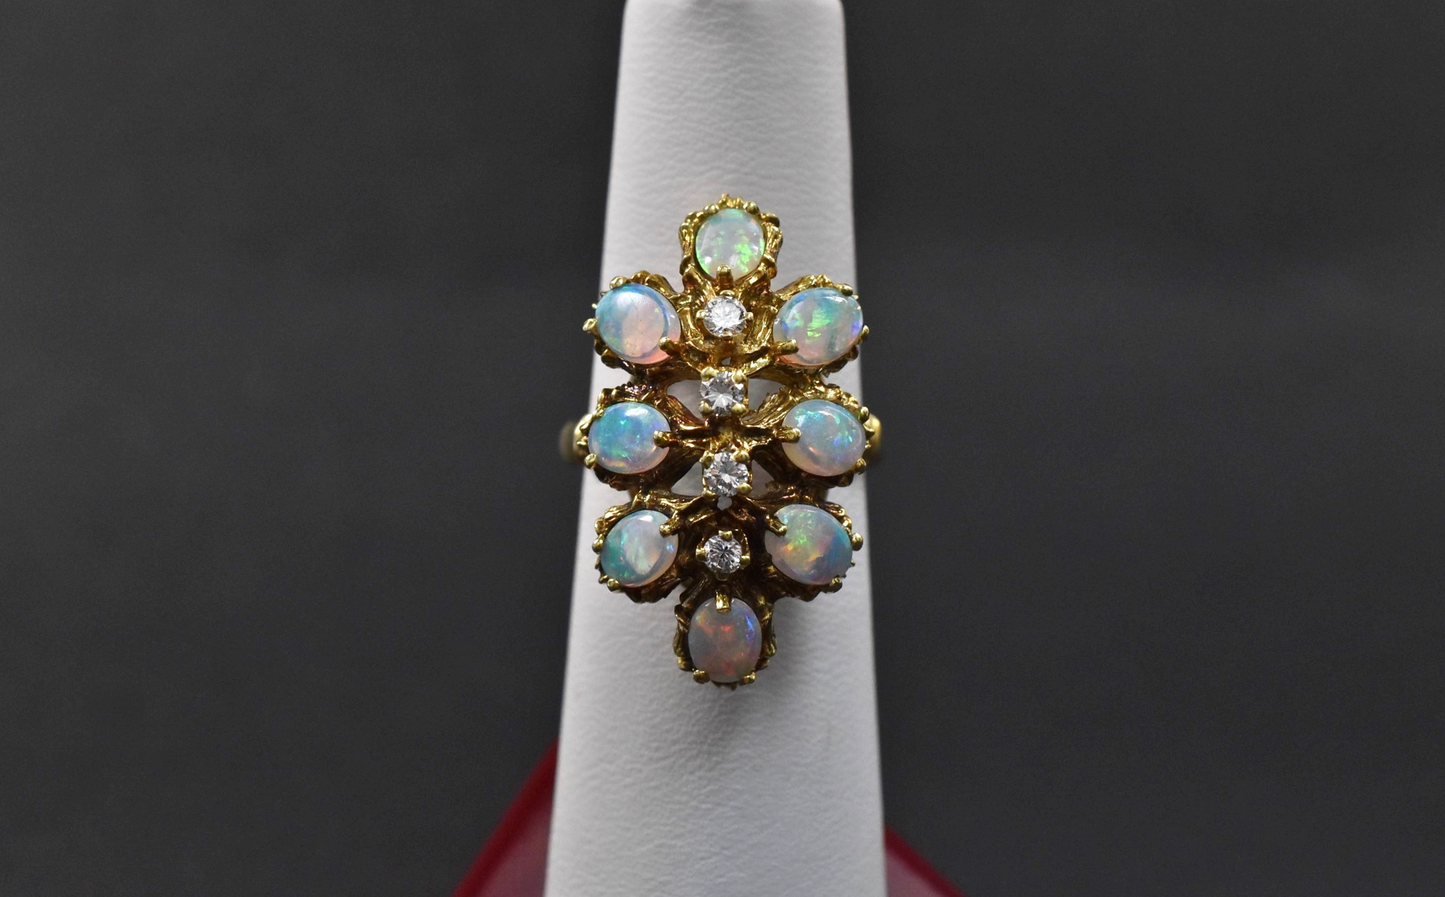 Vintage 14k Yellow Gold Cabochon Opal & Diamond Cocktail Ring, Size 6.75 - 6.3g